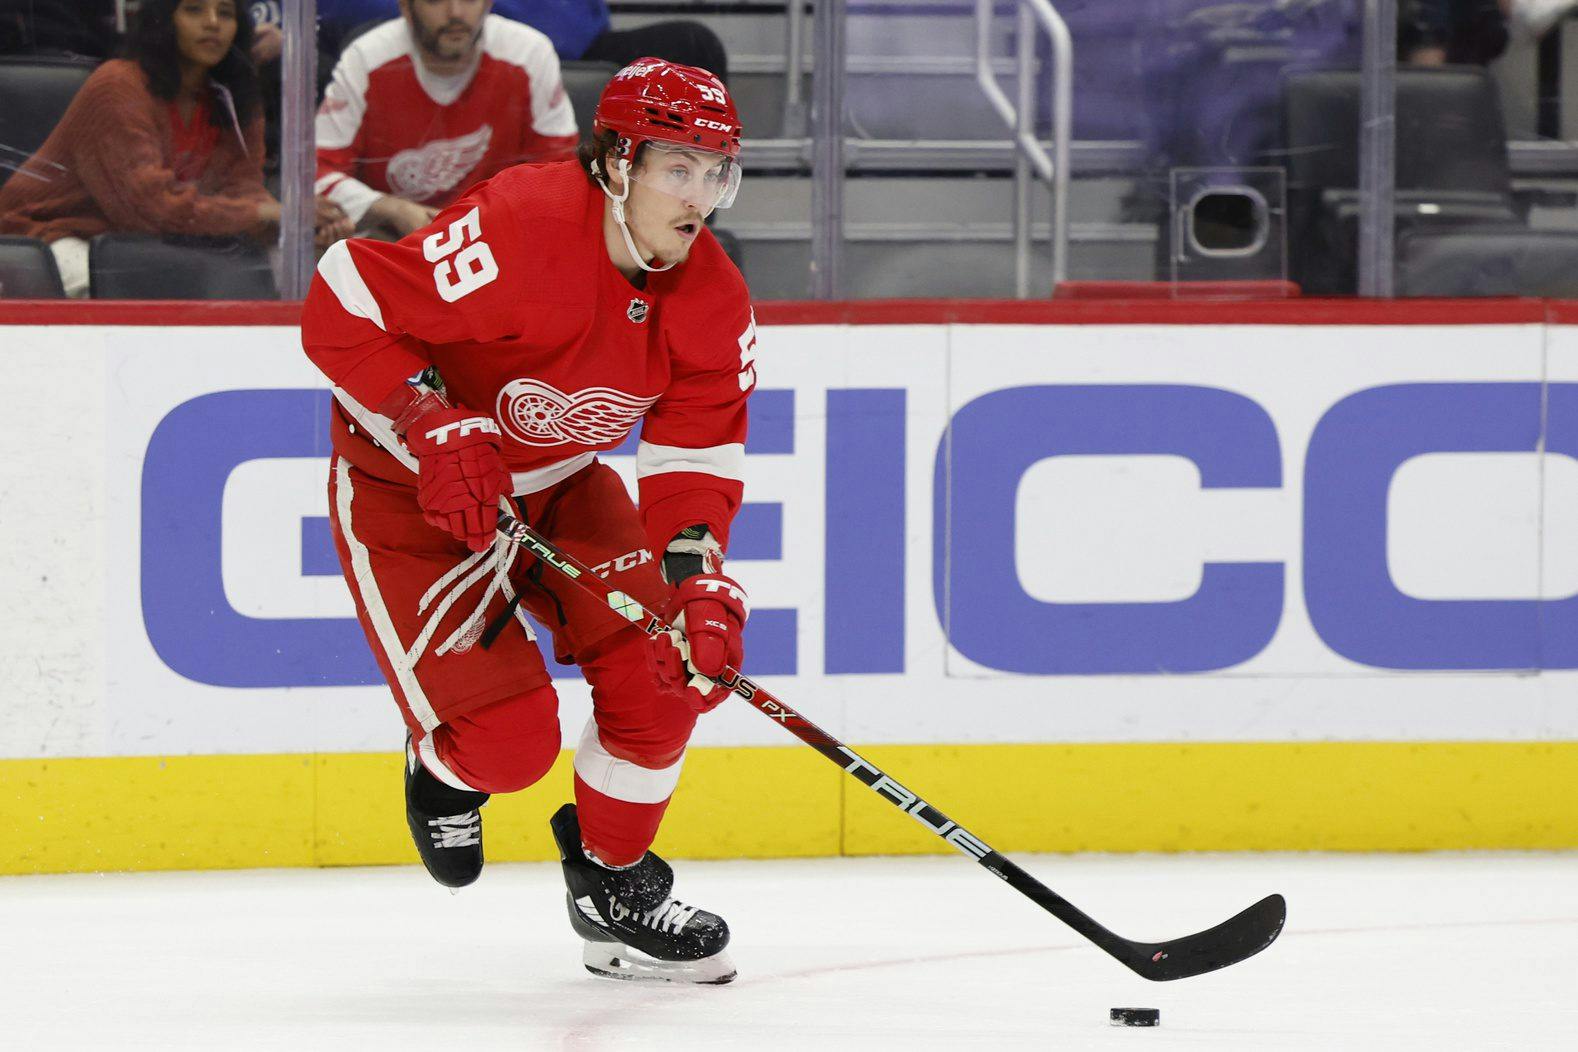 Nedeljkovic makes 17 saves, Red Wings blank Devils 3-0 – Macomb Daily